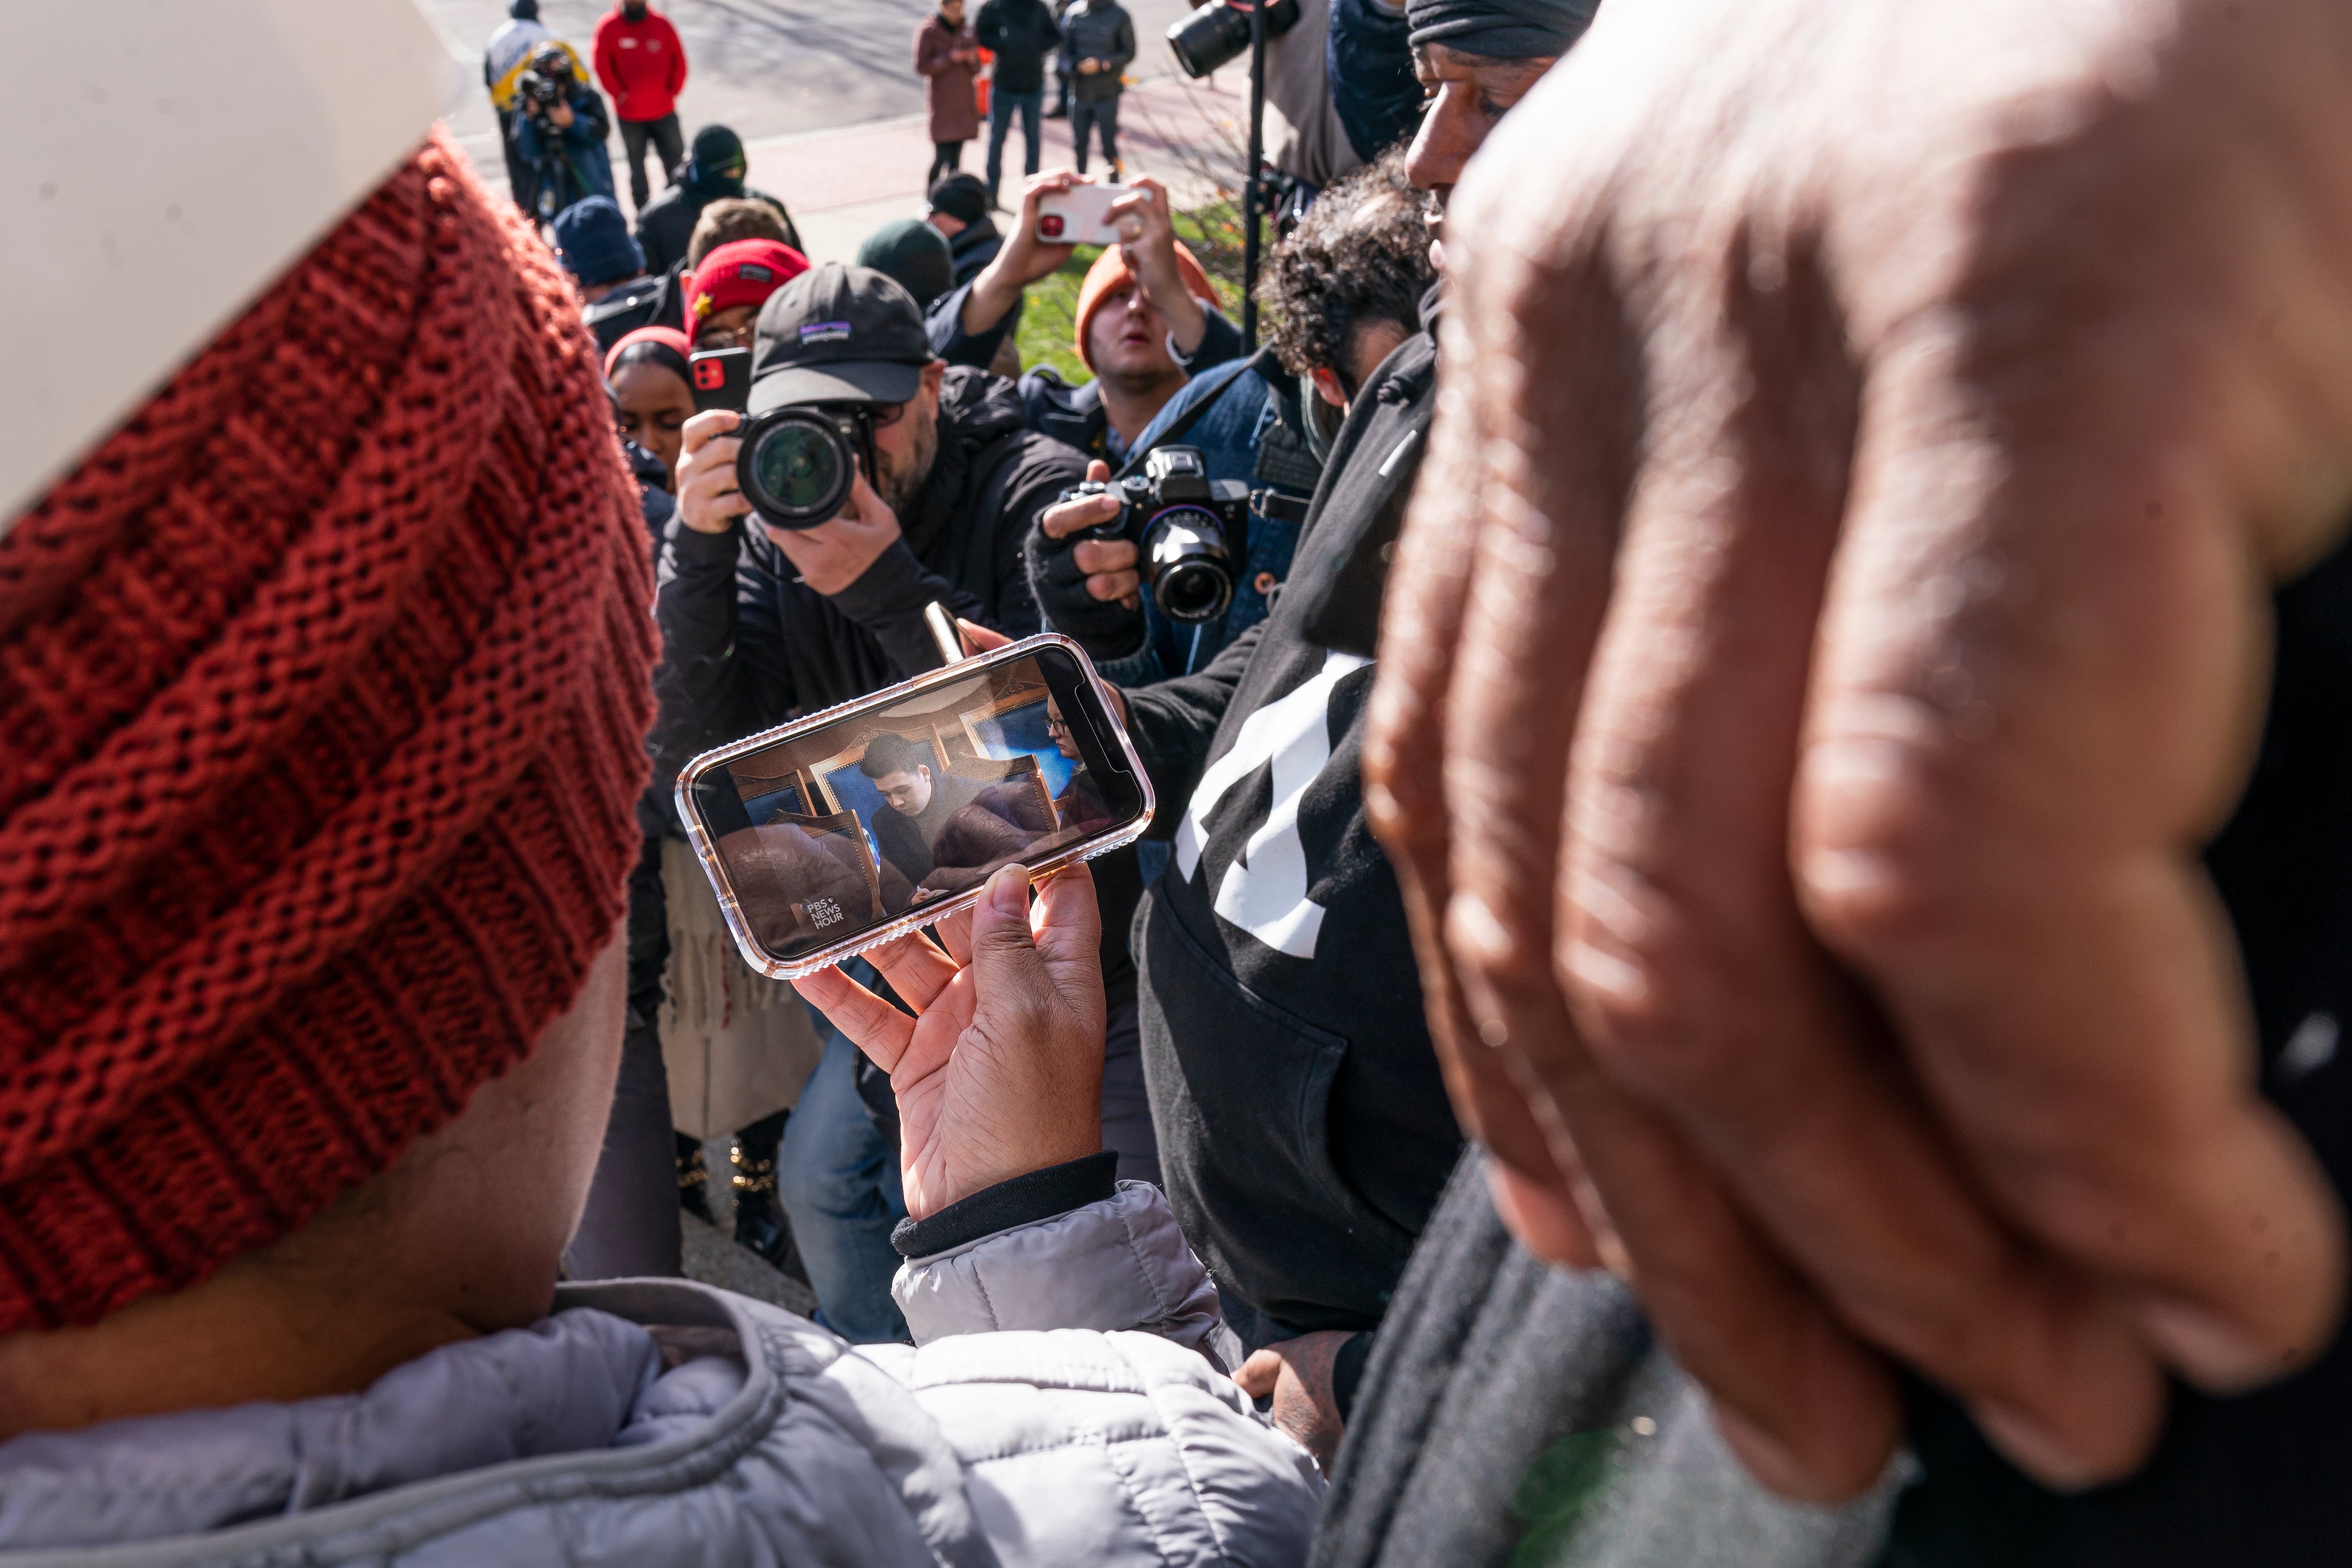 Demonstrators watch the trial of Kyle Rittenhouse on a cell phone outside of the courthouse, as members of the media make photographs of them. A hand takes up the right side of the frame in the foreground of the image.